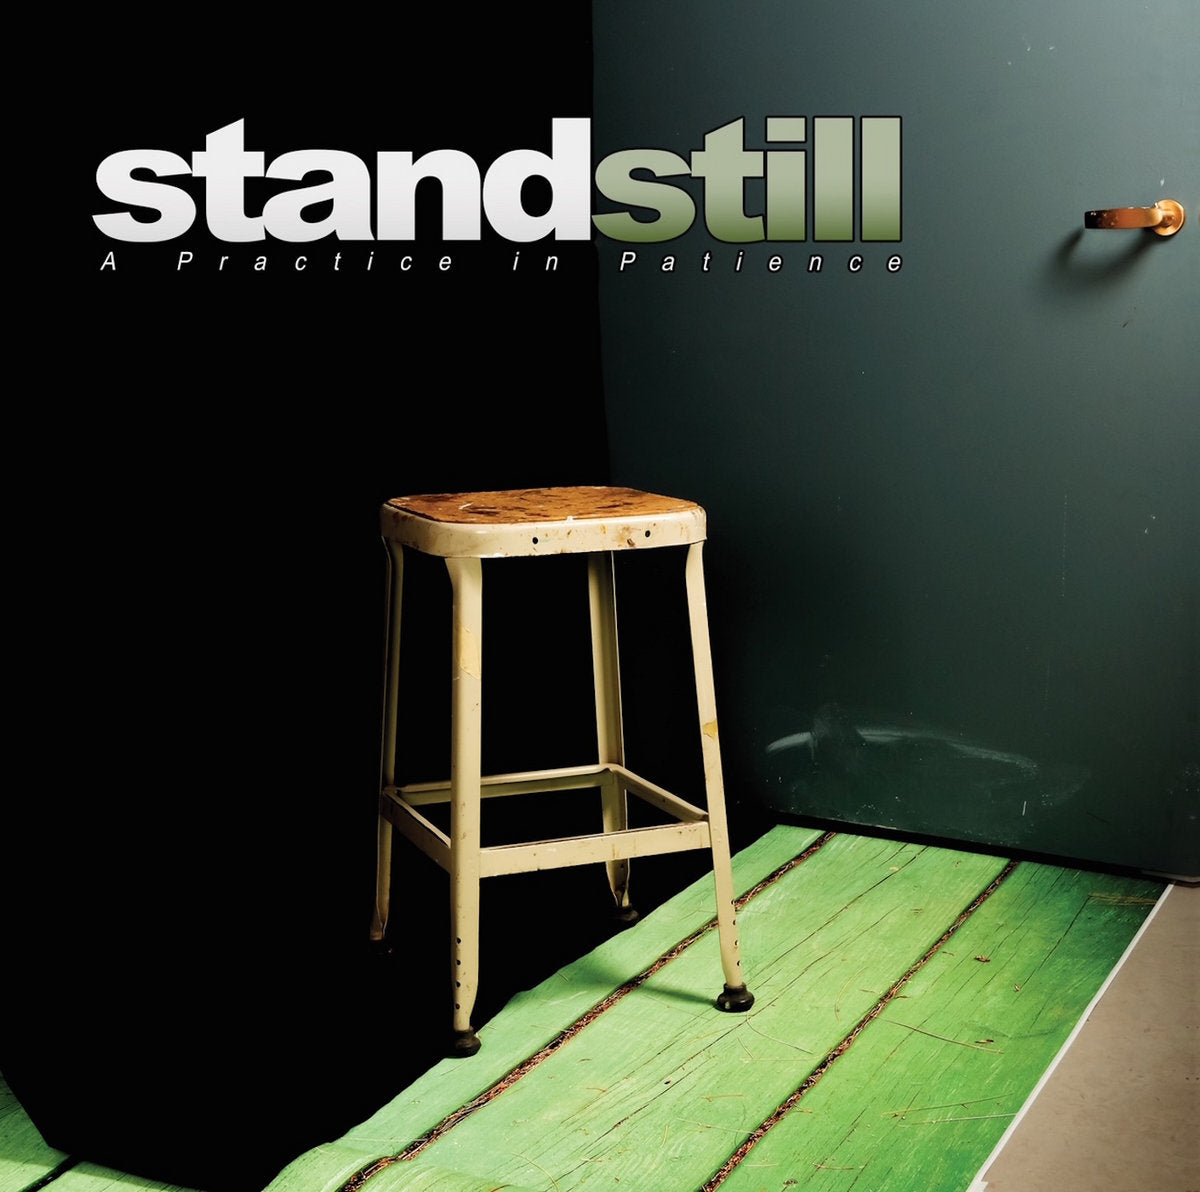 STAND STILL "A Practice In Patience" 12"